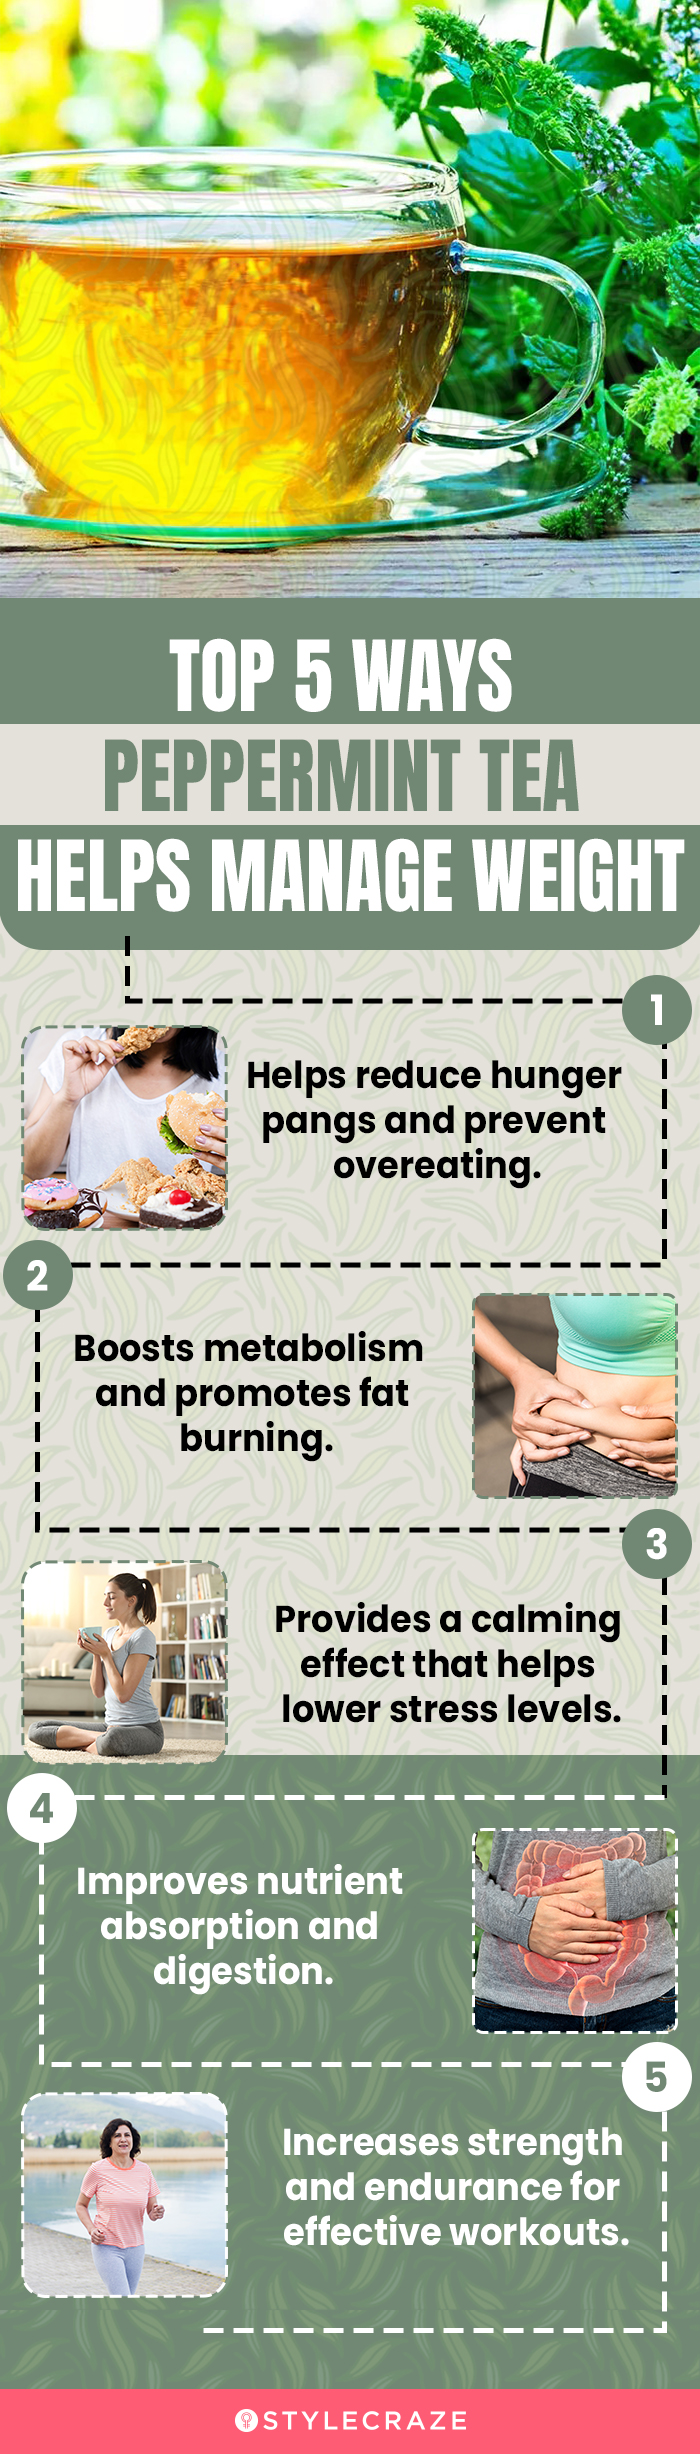 top 5 ways peppermint tea helps manage weight (infographic)